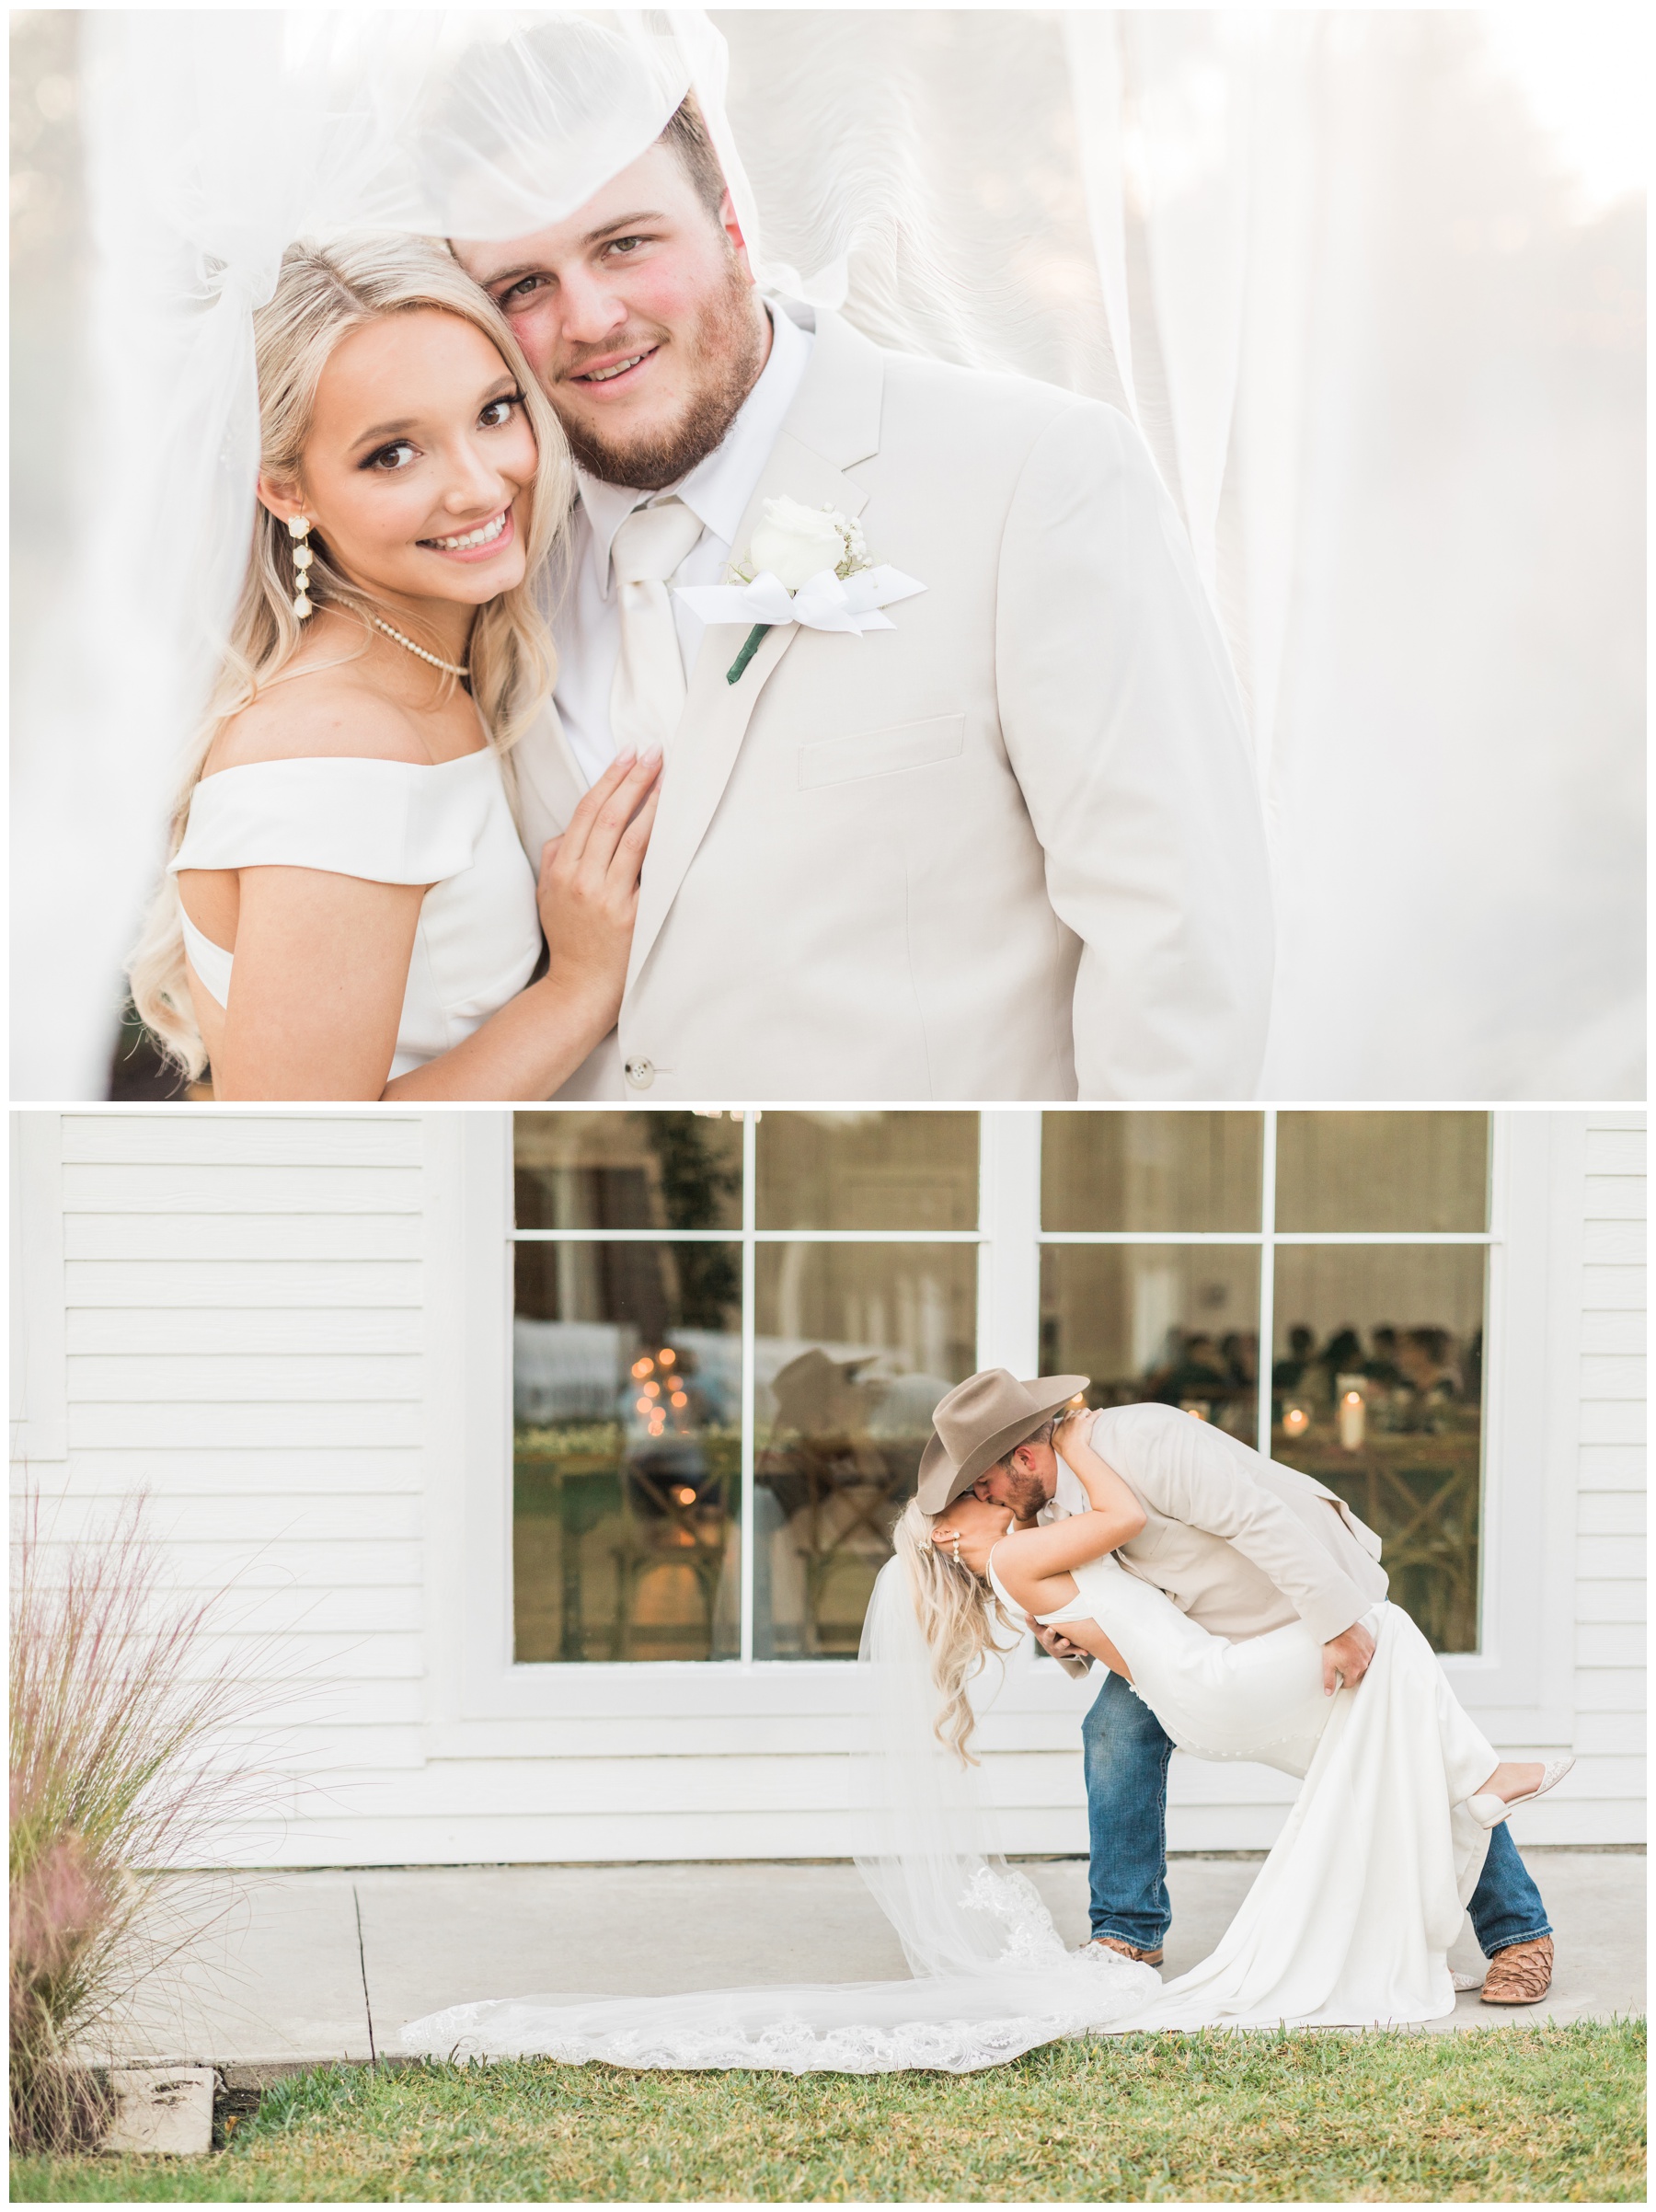 Bridal portraits at The Springs in Wallisville